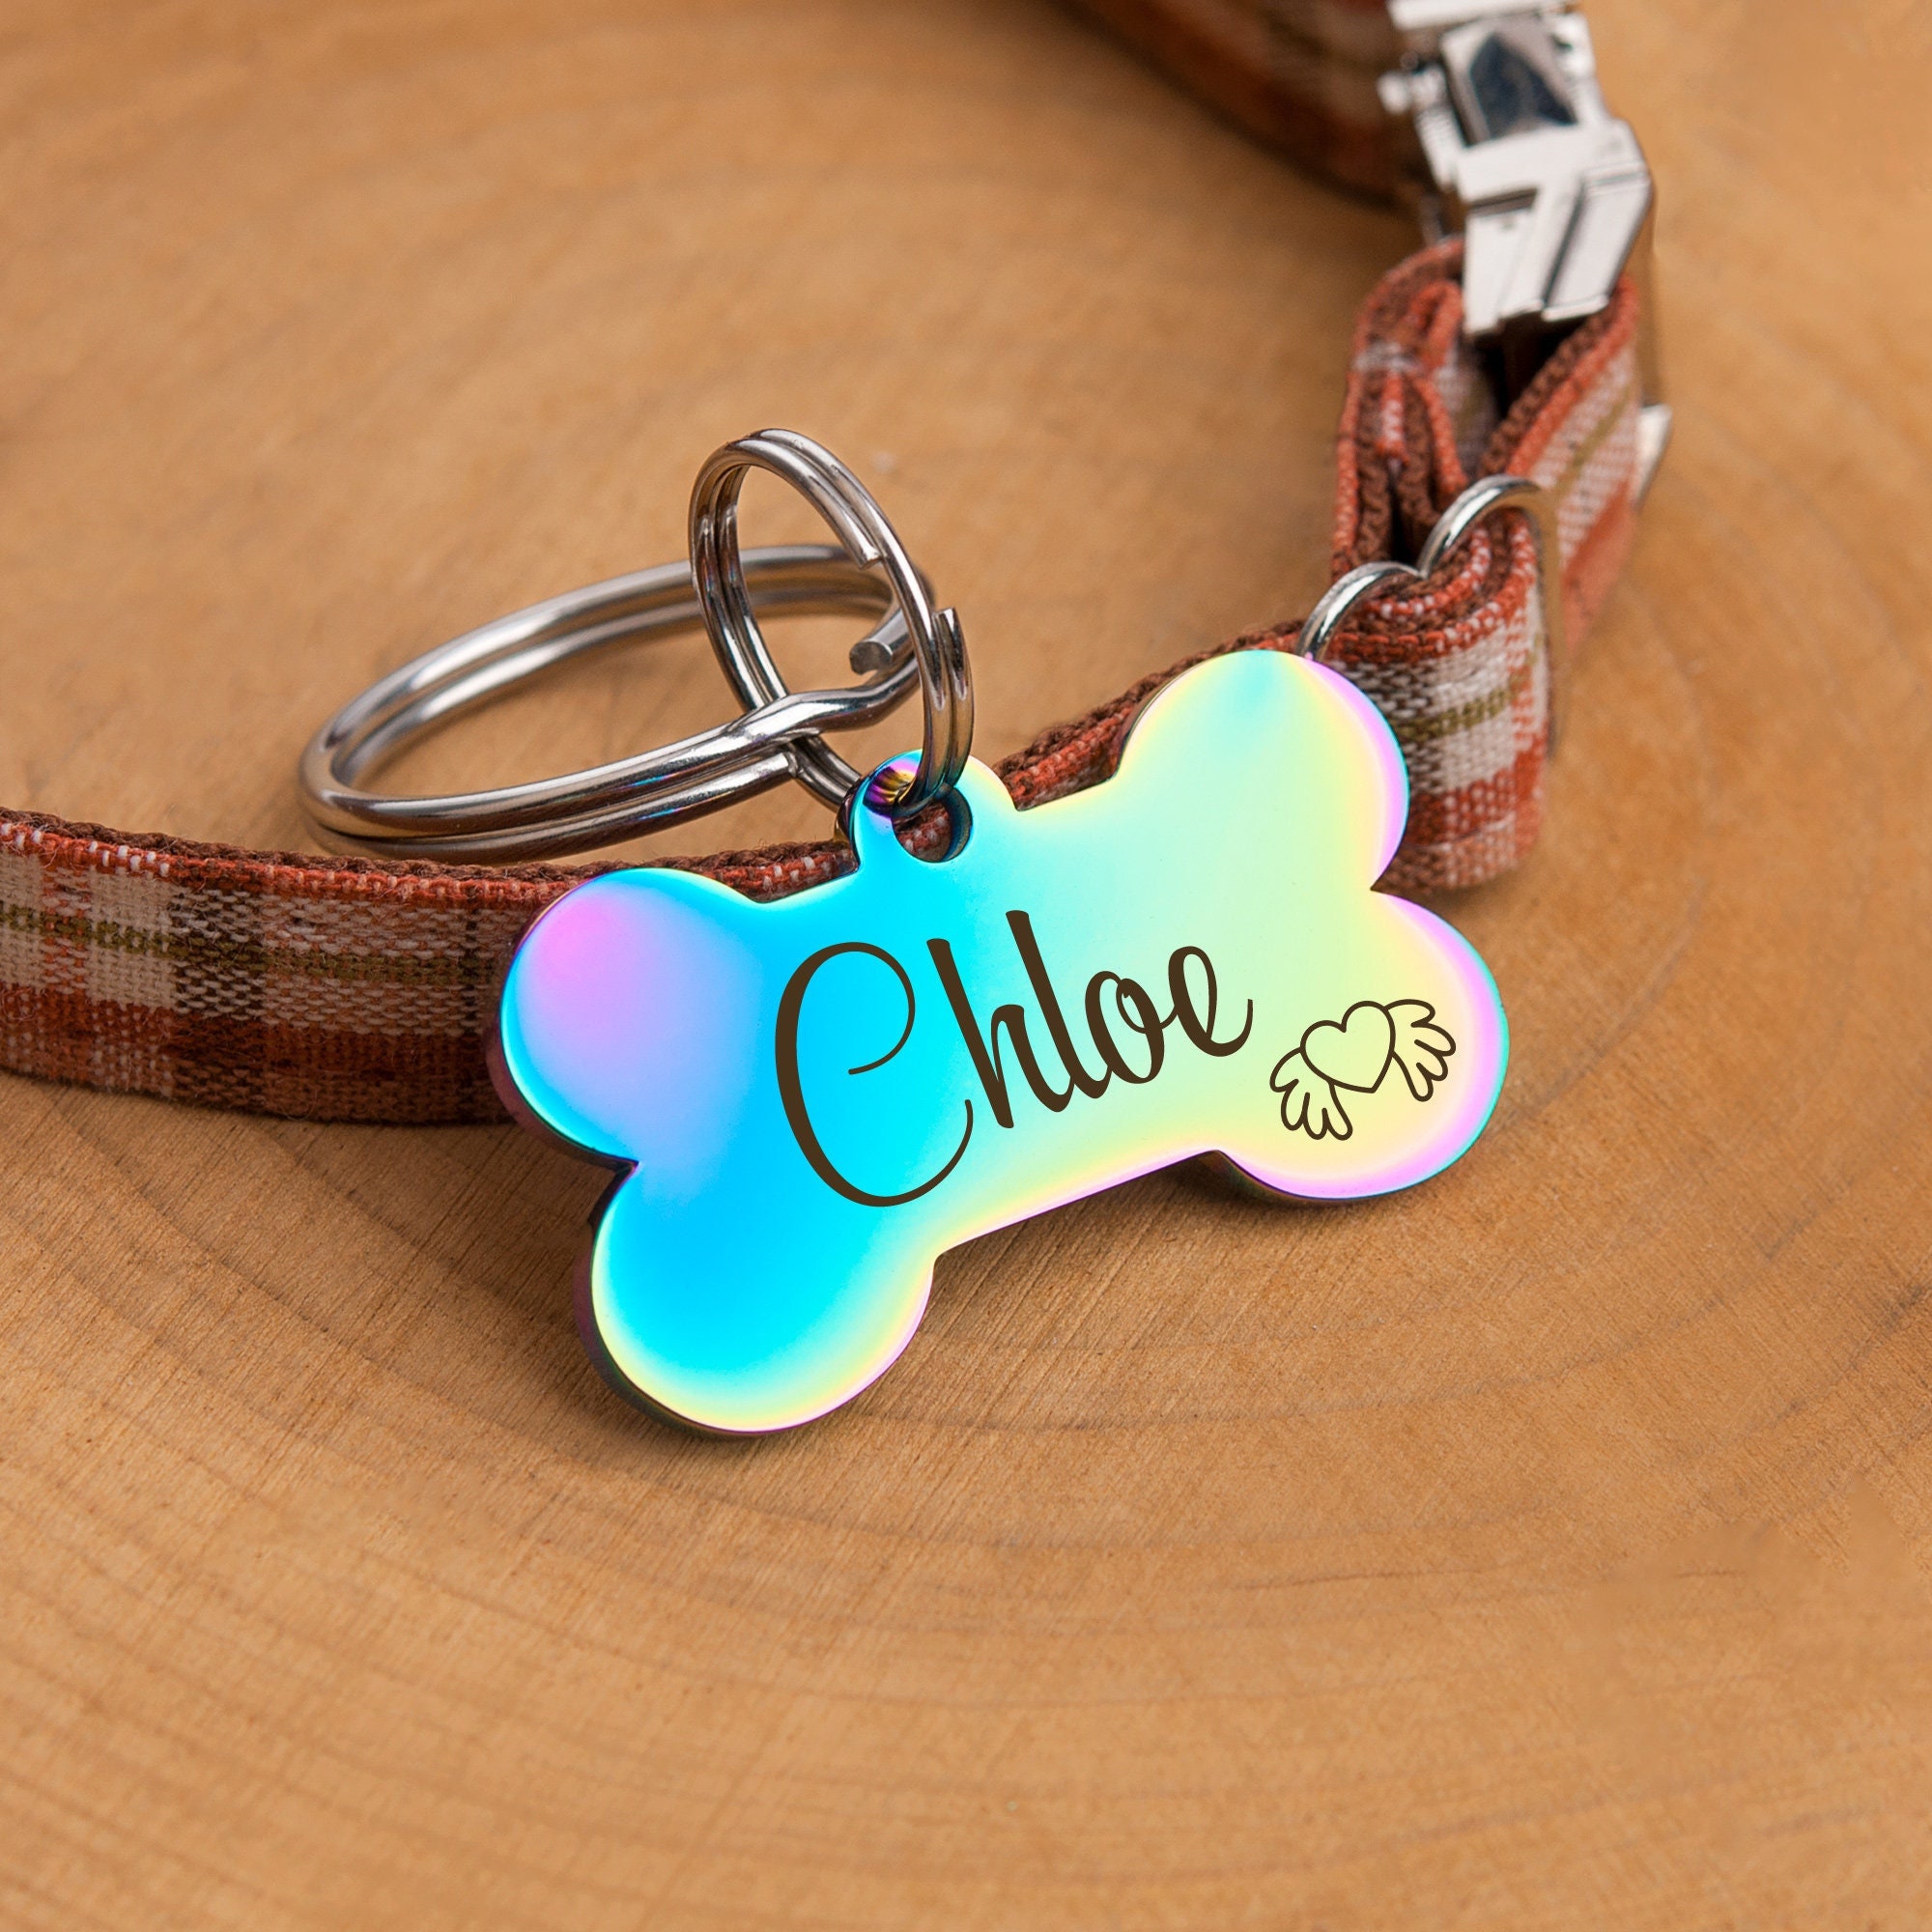 25 Hilarious Funny Dog Tags To Tickle Your Doggy Bone